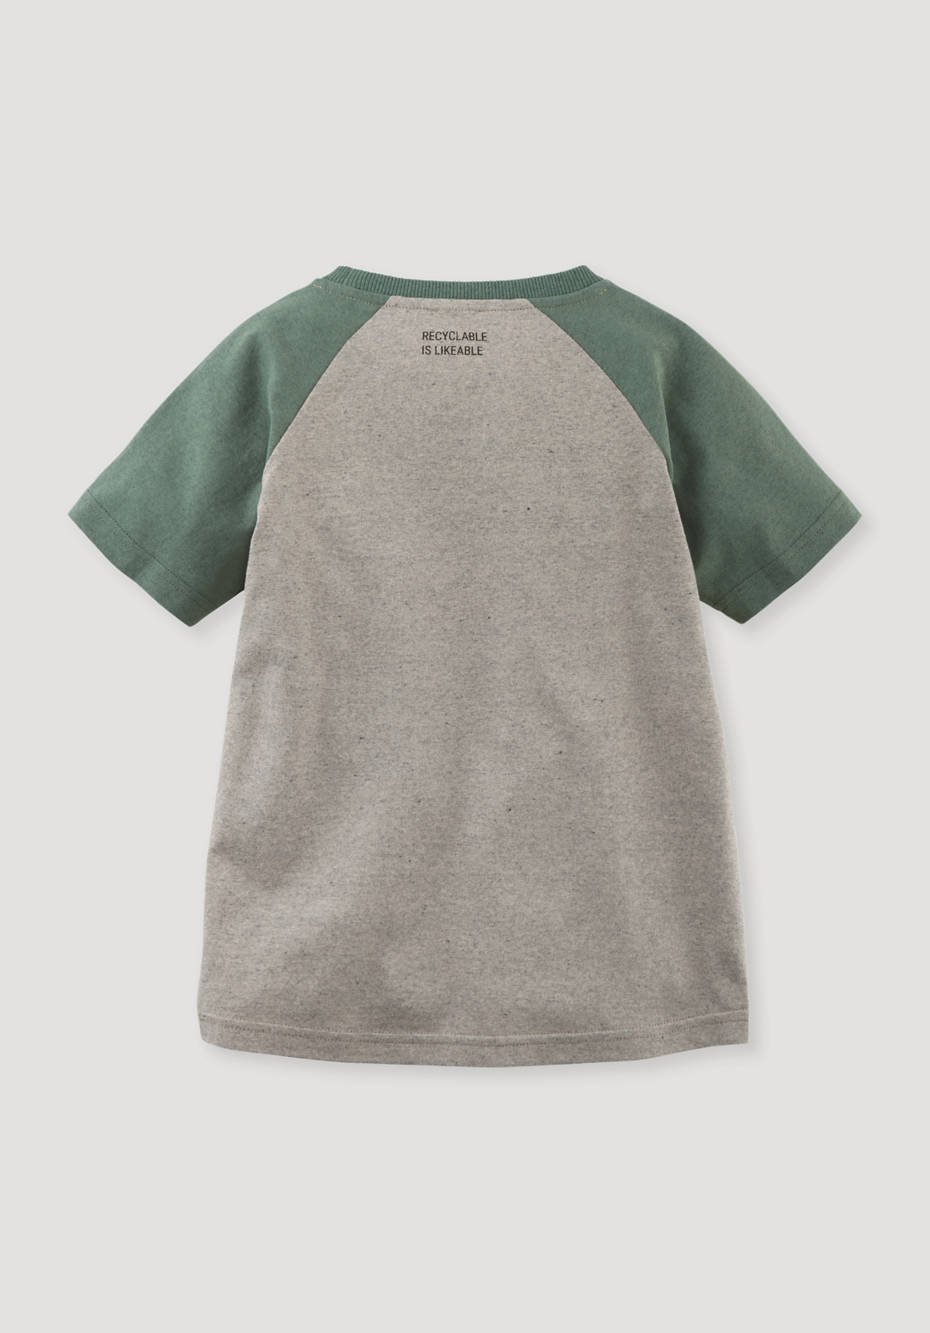 BetterRecycling shirt made from pure organic cotton